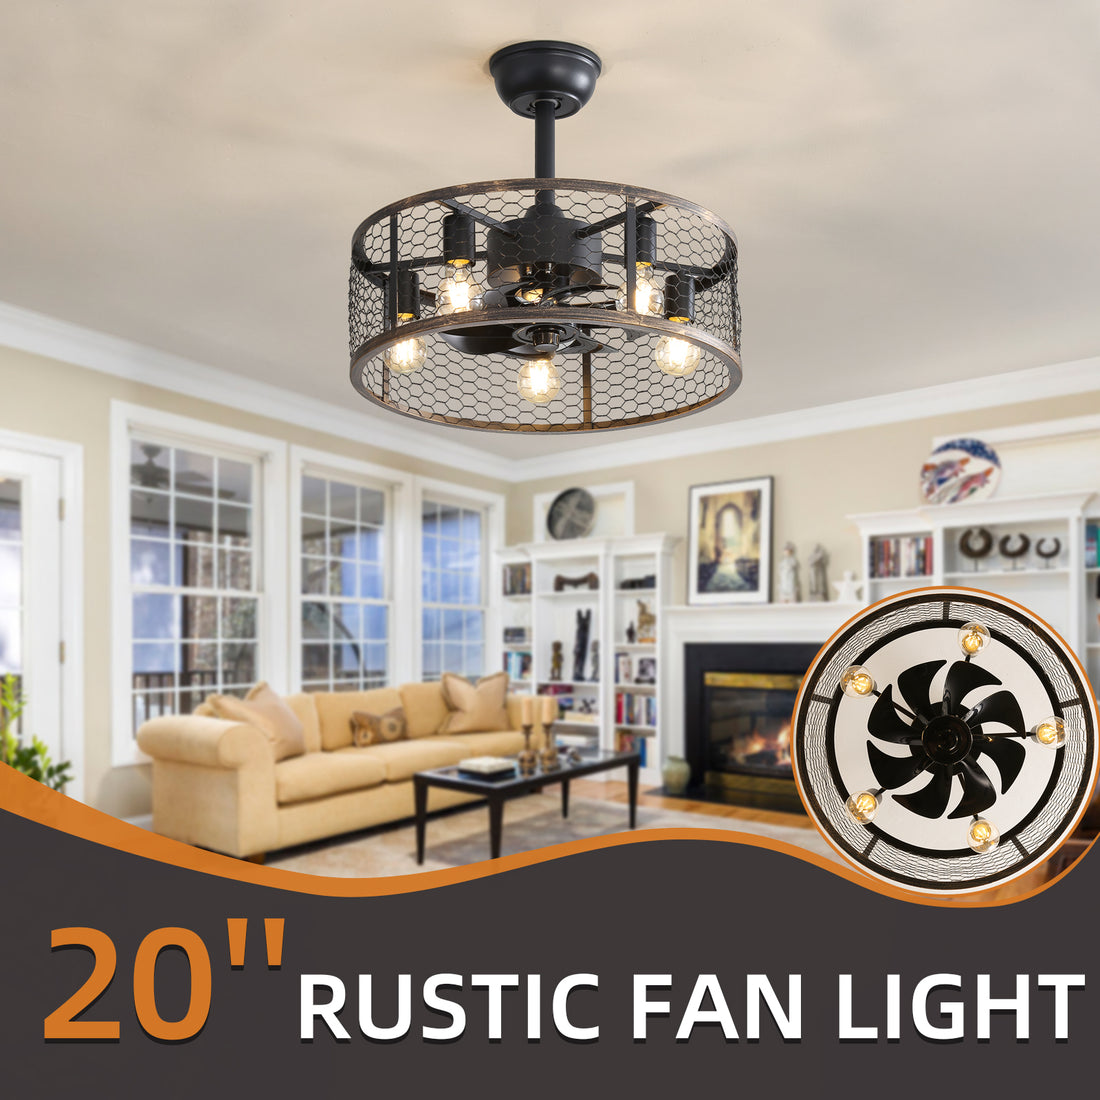 19.7In Classic Ceiling Fan with Light Note:No